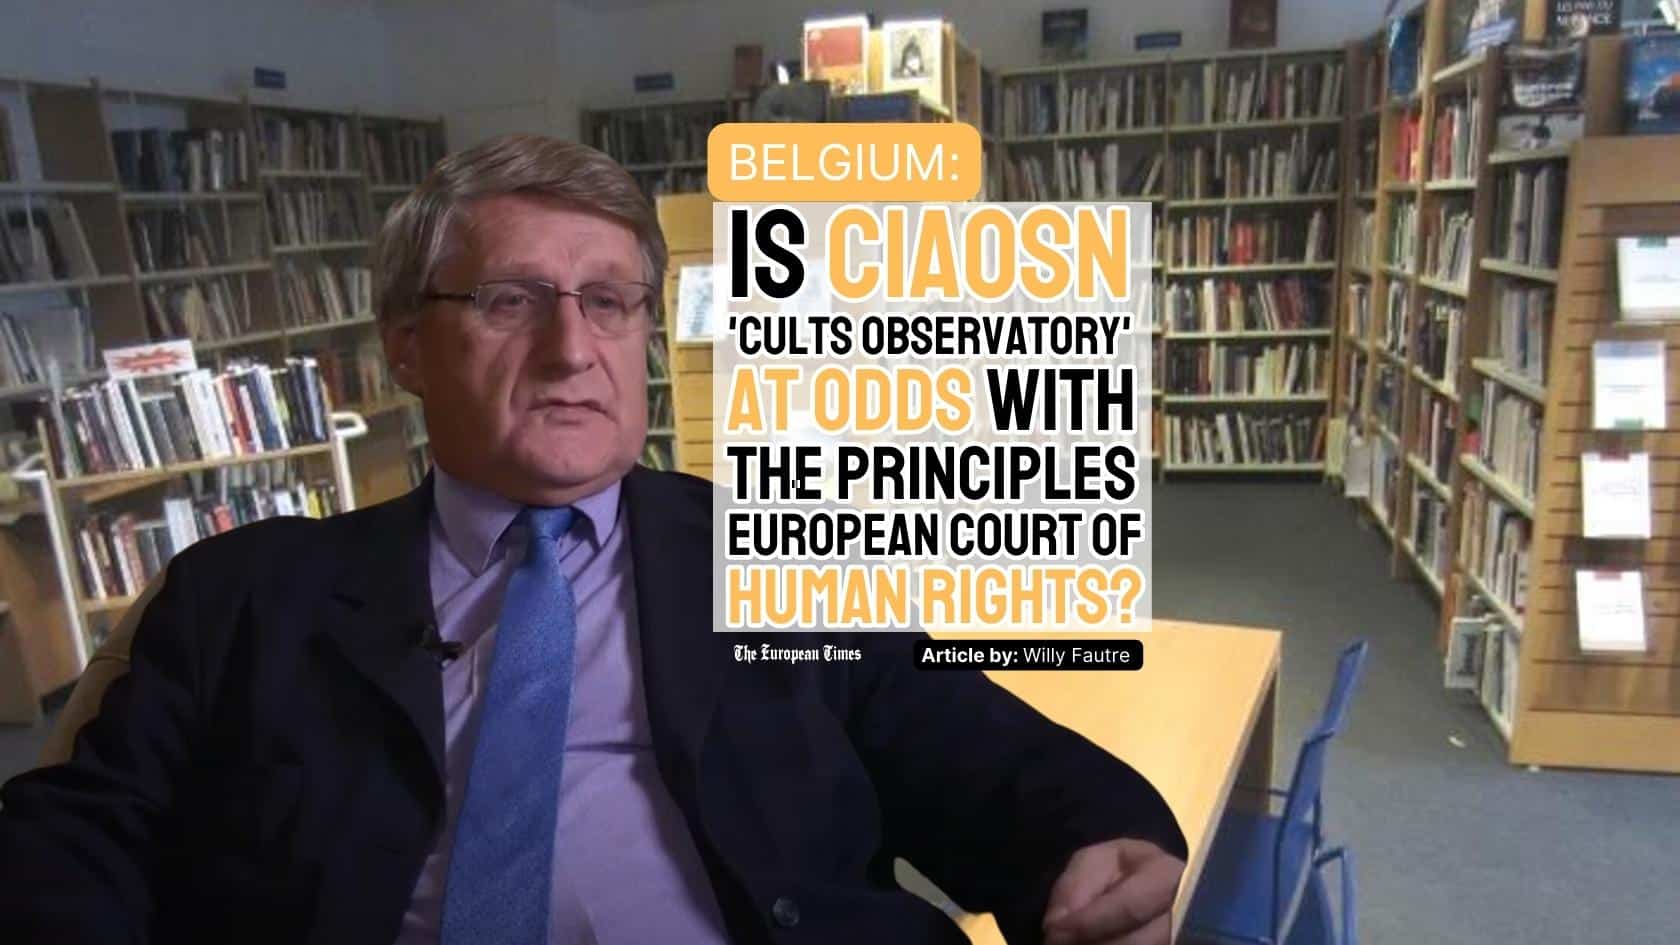 Belgium, Is CIAOSN 'Cults Observatory' at odds with principles of the European Court of Human Rights?